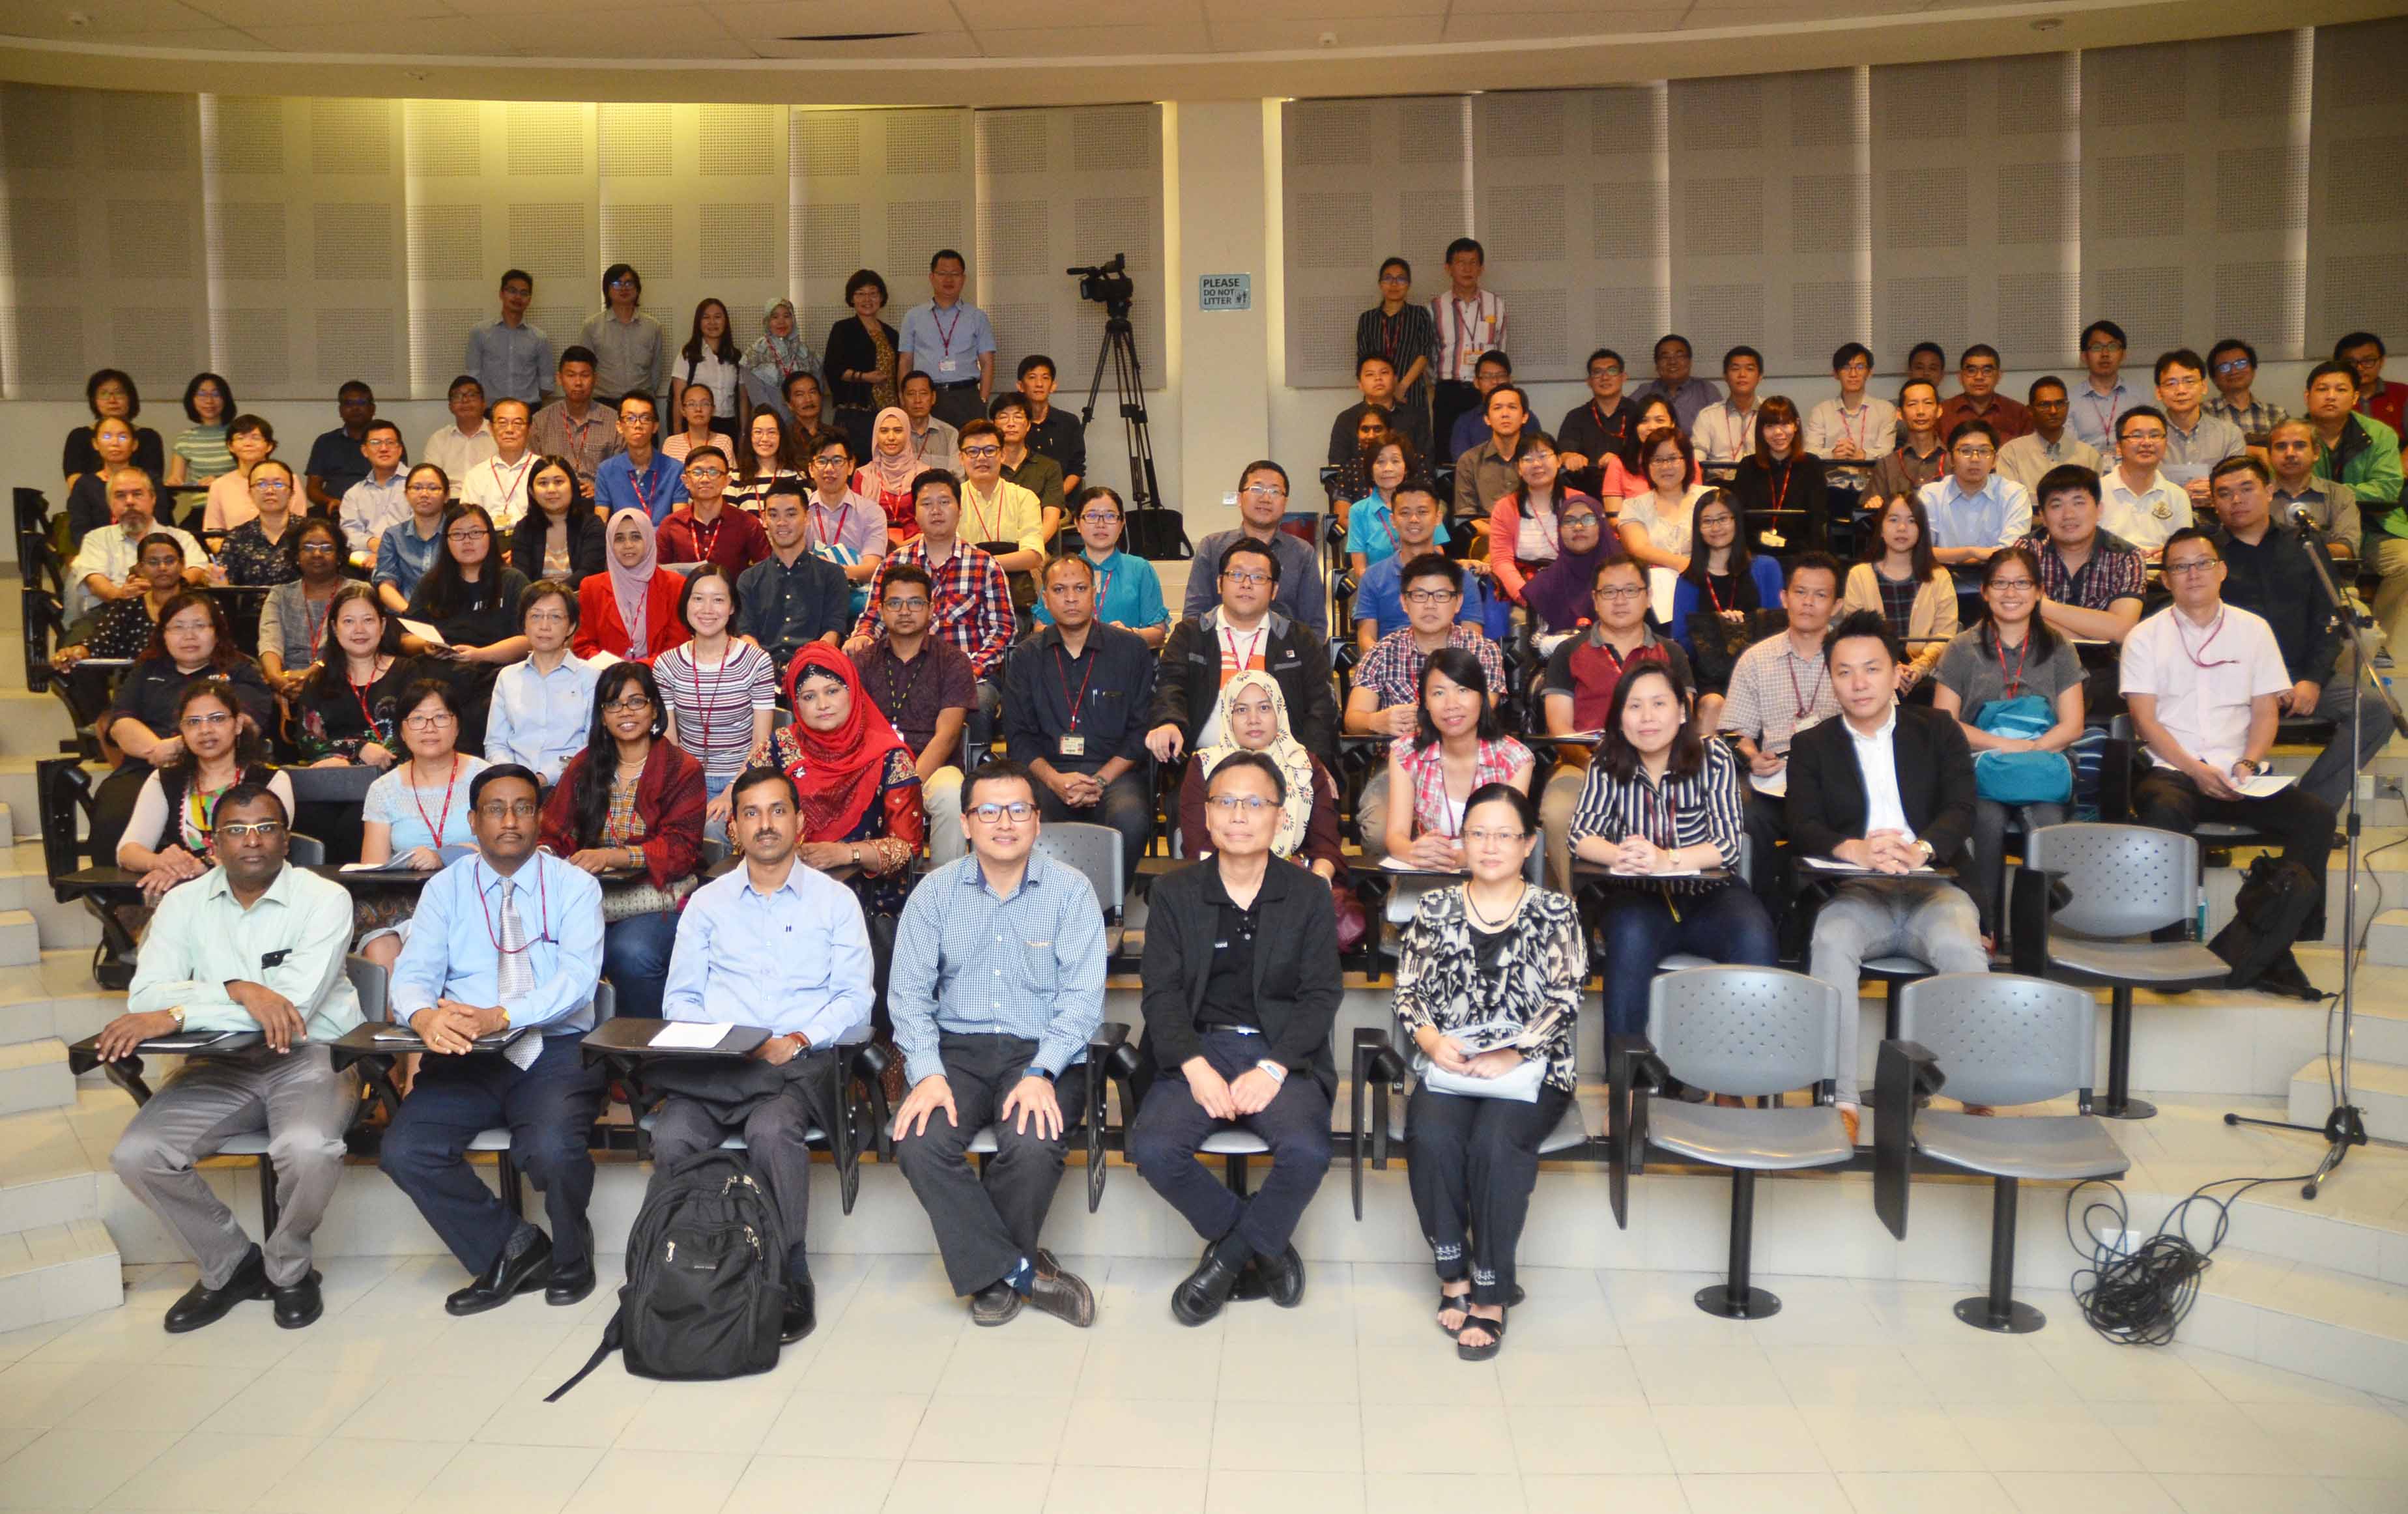 Prof Lee (second from right) with presenters and participants of the colloquium